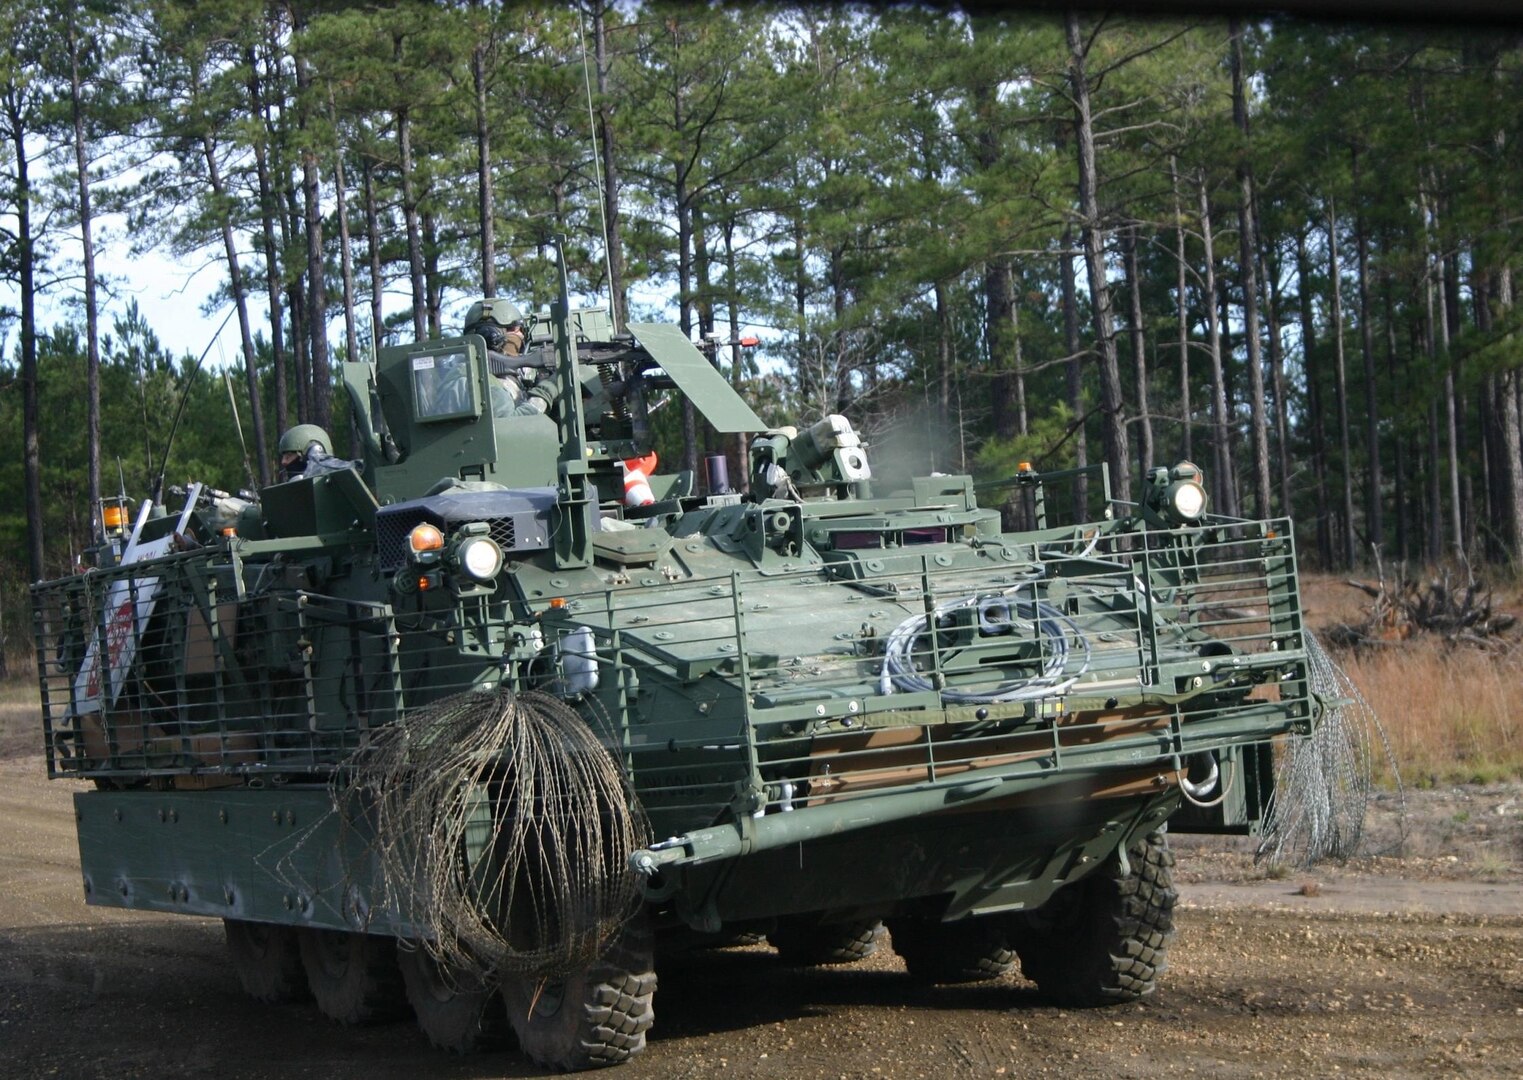 A Stryker vehicle from the 56th SBCT, Pennsylvania National Guard moves out to conduct joint operations during JRTC rotation 09-02 at Ft. Polk, La.